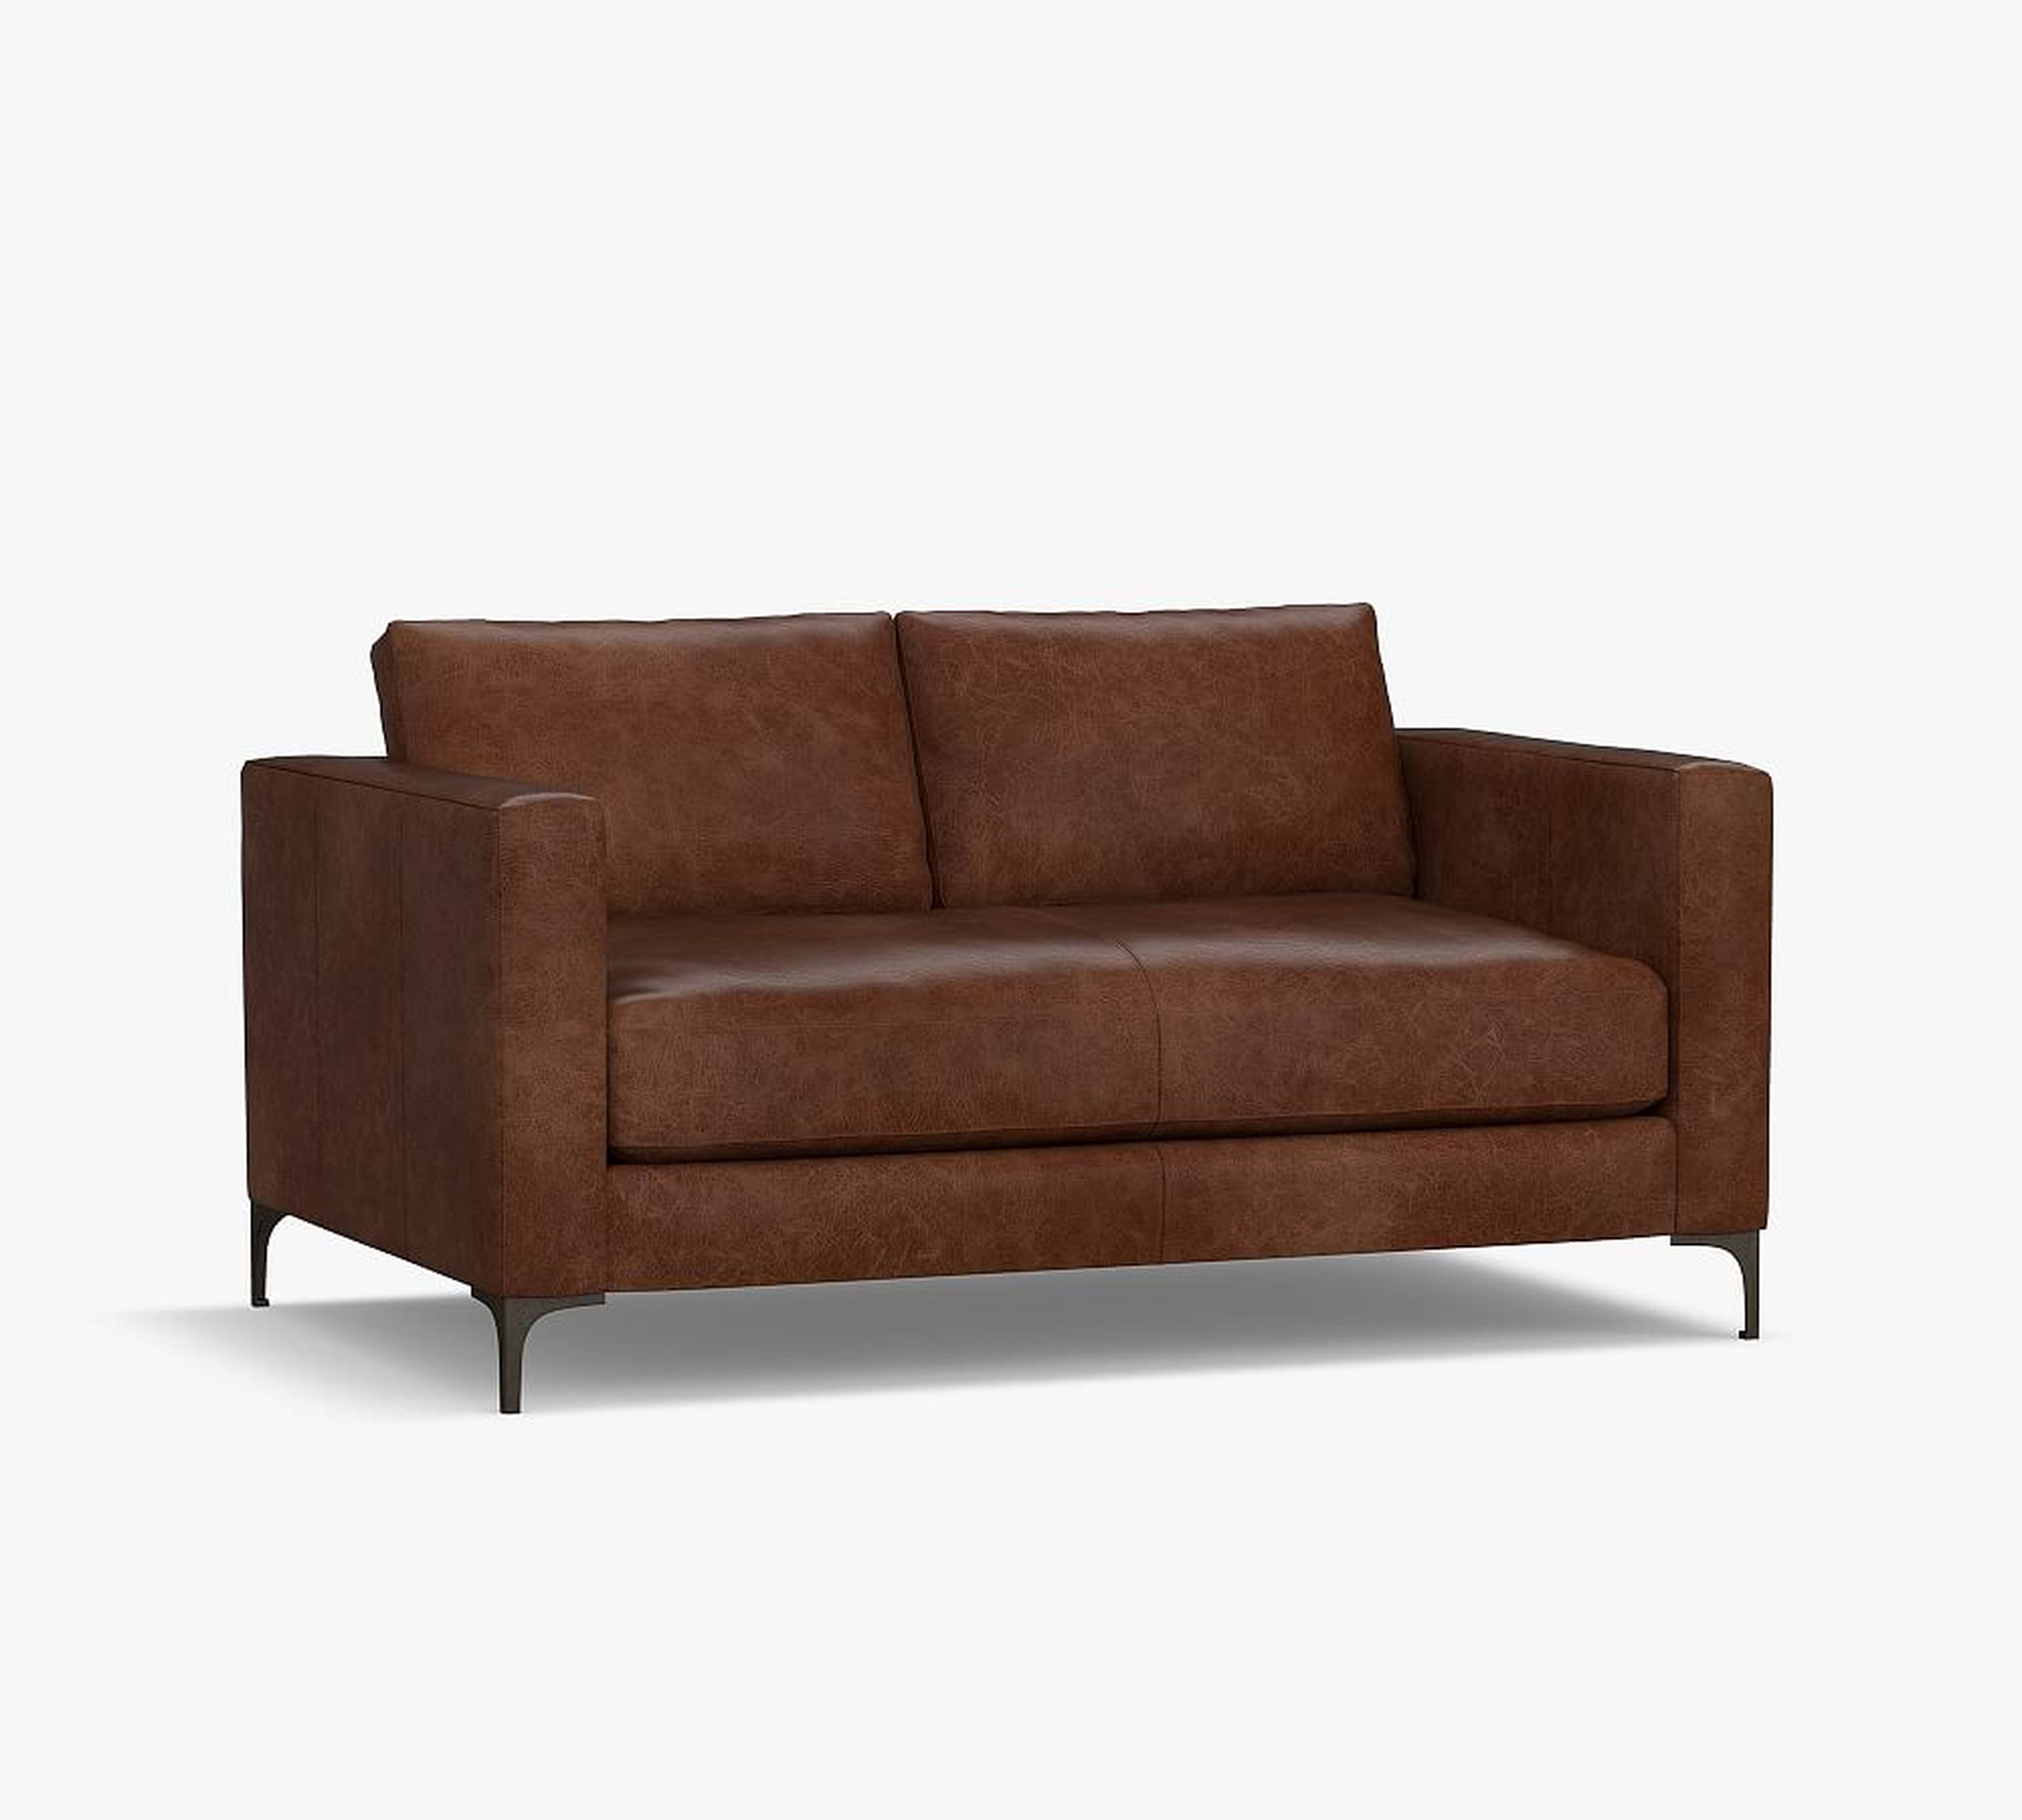 Jake Leather Apartment Sofa 63" with Bronze Legs, Down Blend Wrapped Cushions, Churchfield Camel - Pottery Barn